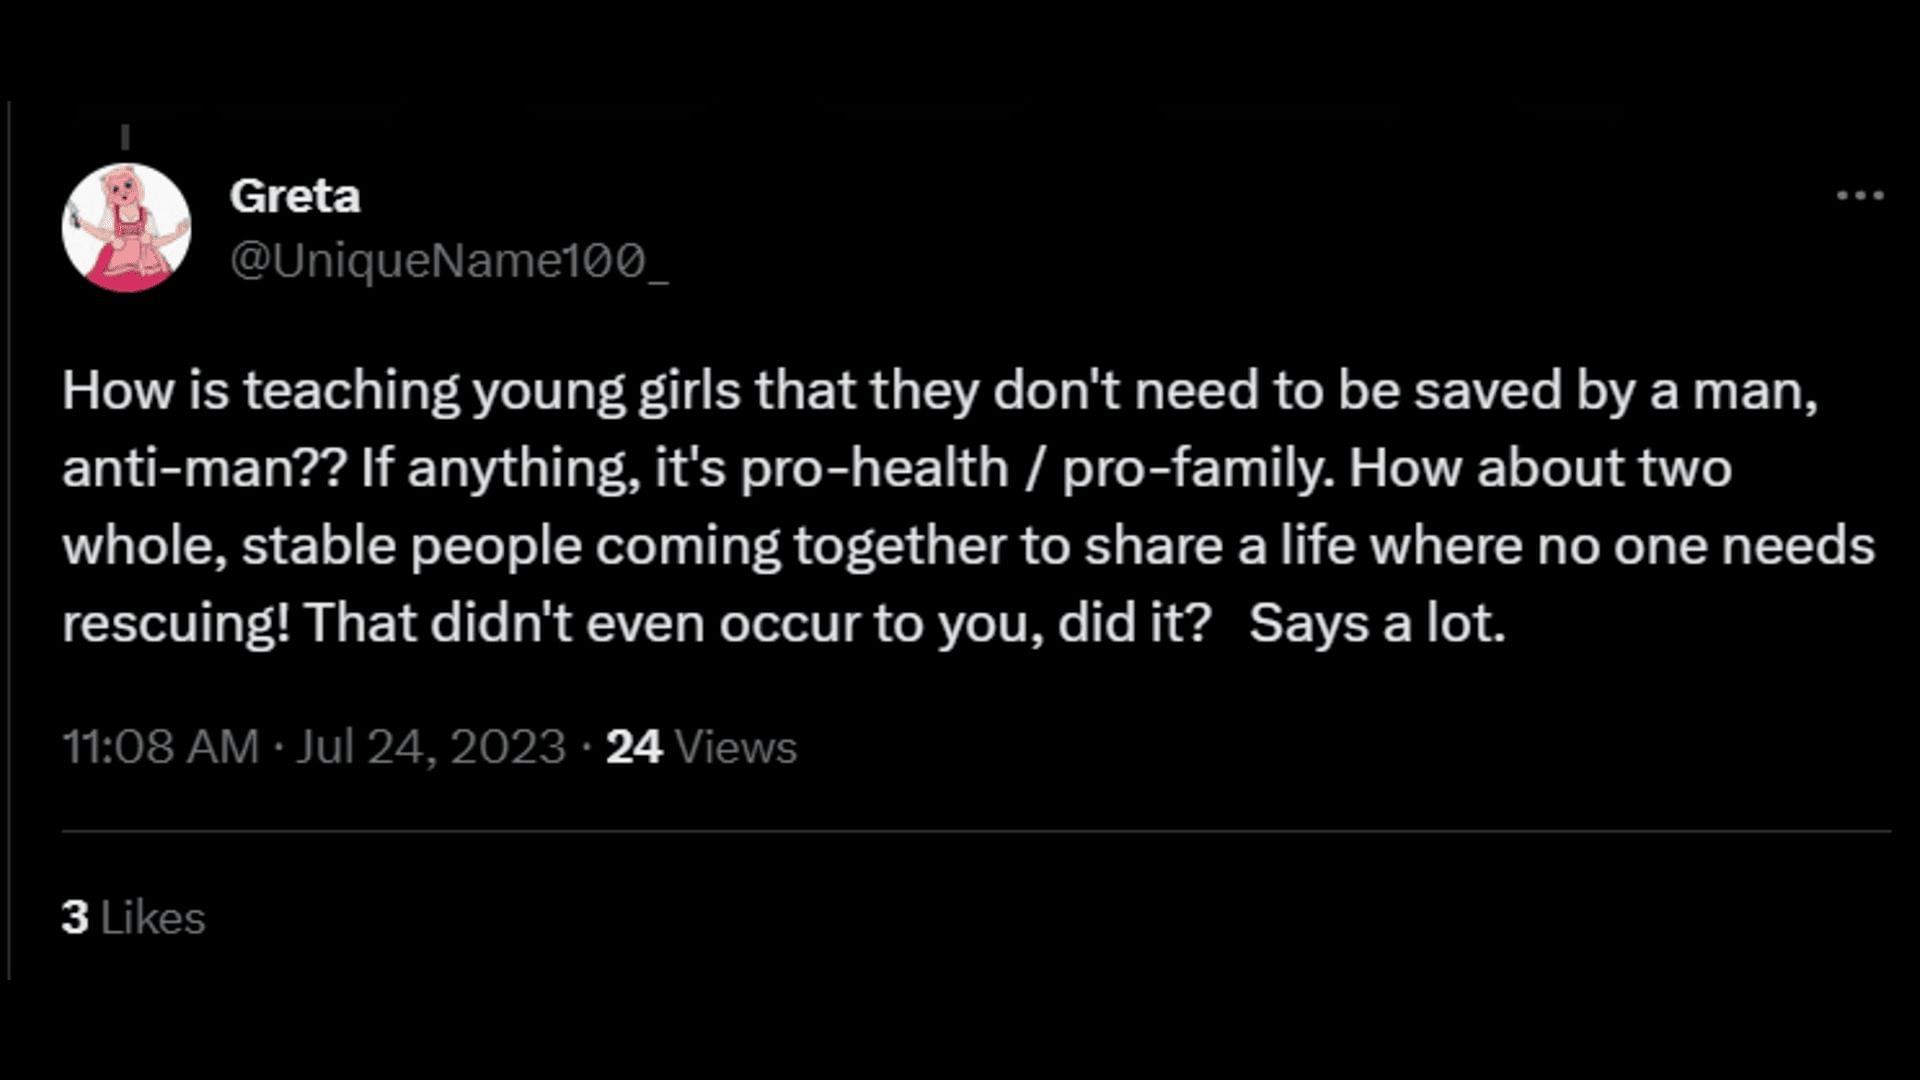 A netizen feels that teaching girls they don&#039;t need rescuing from men is backdated. (Image via Twitter/Greta)